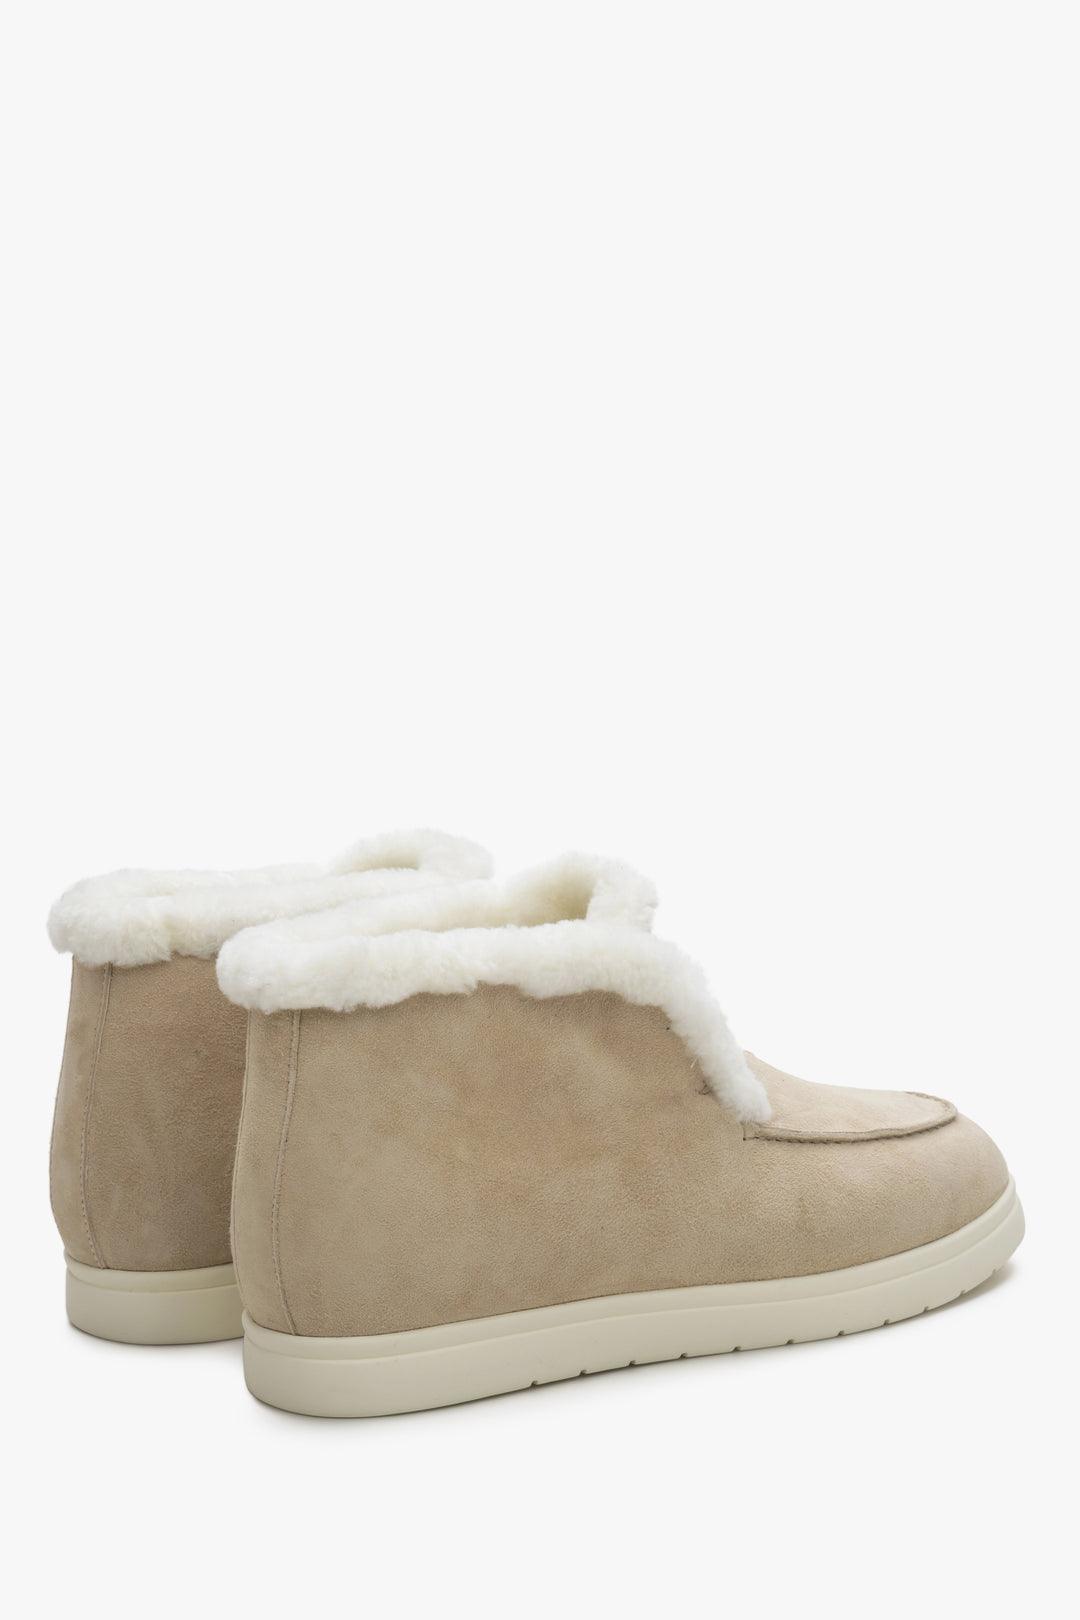 Slip on low-top boots in light beige colour made of velour and fur.